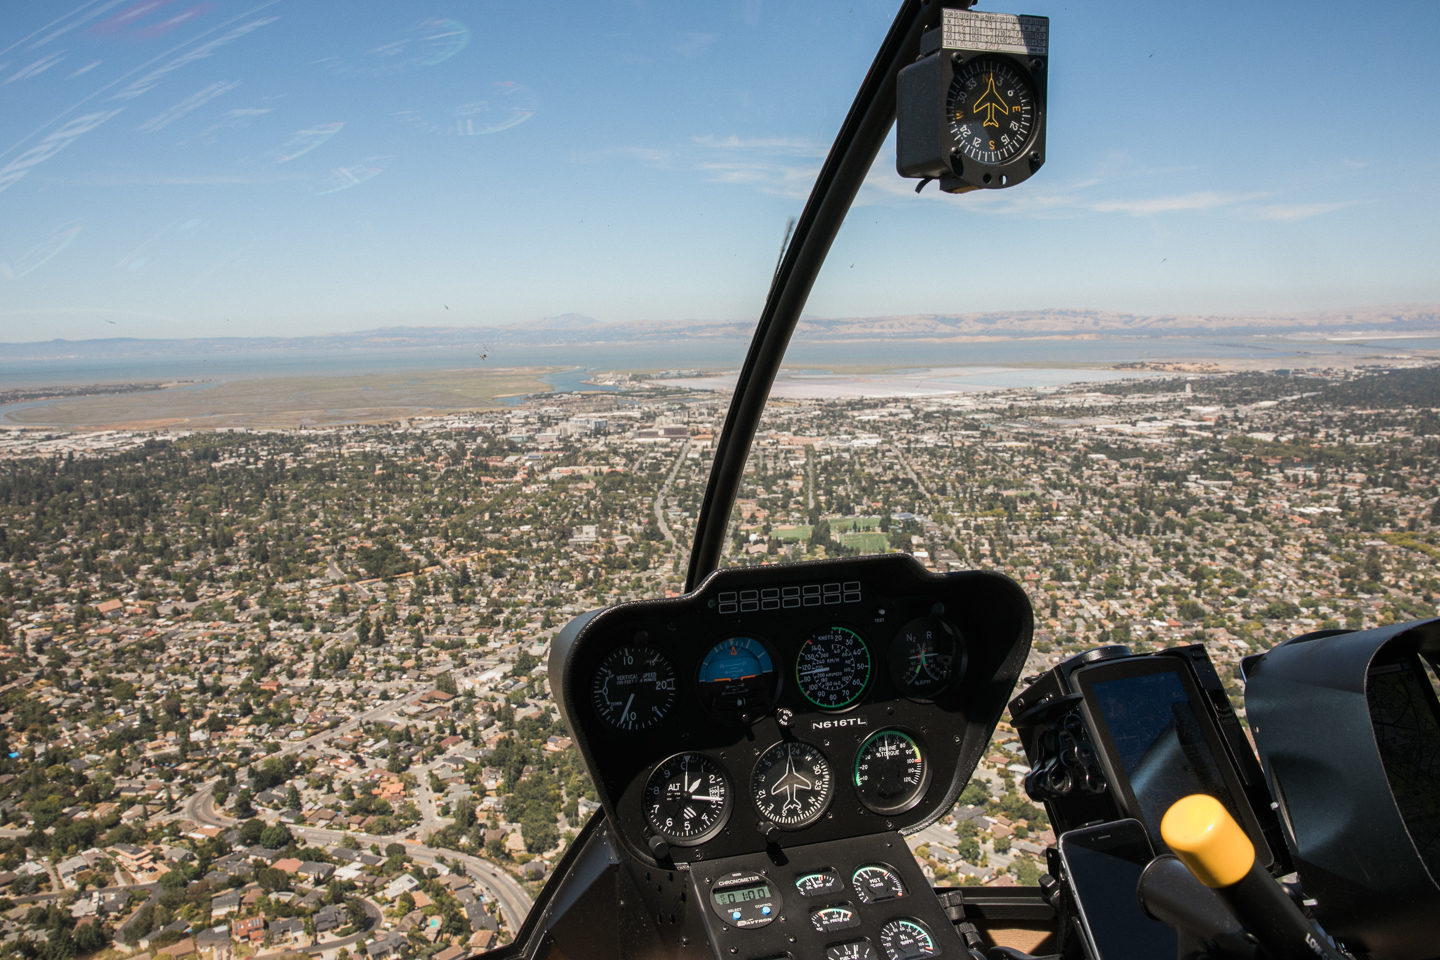 helicopter_proposal_bay_area_029.jpg